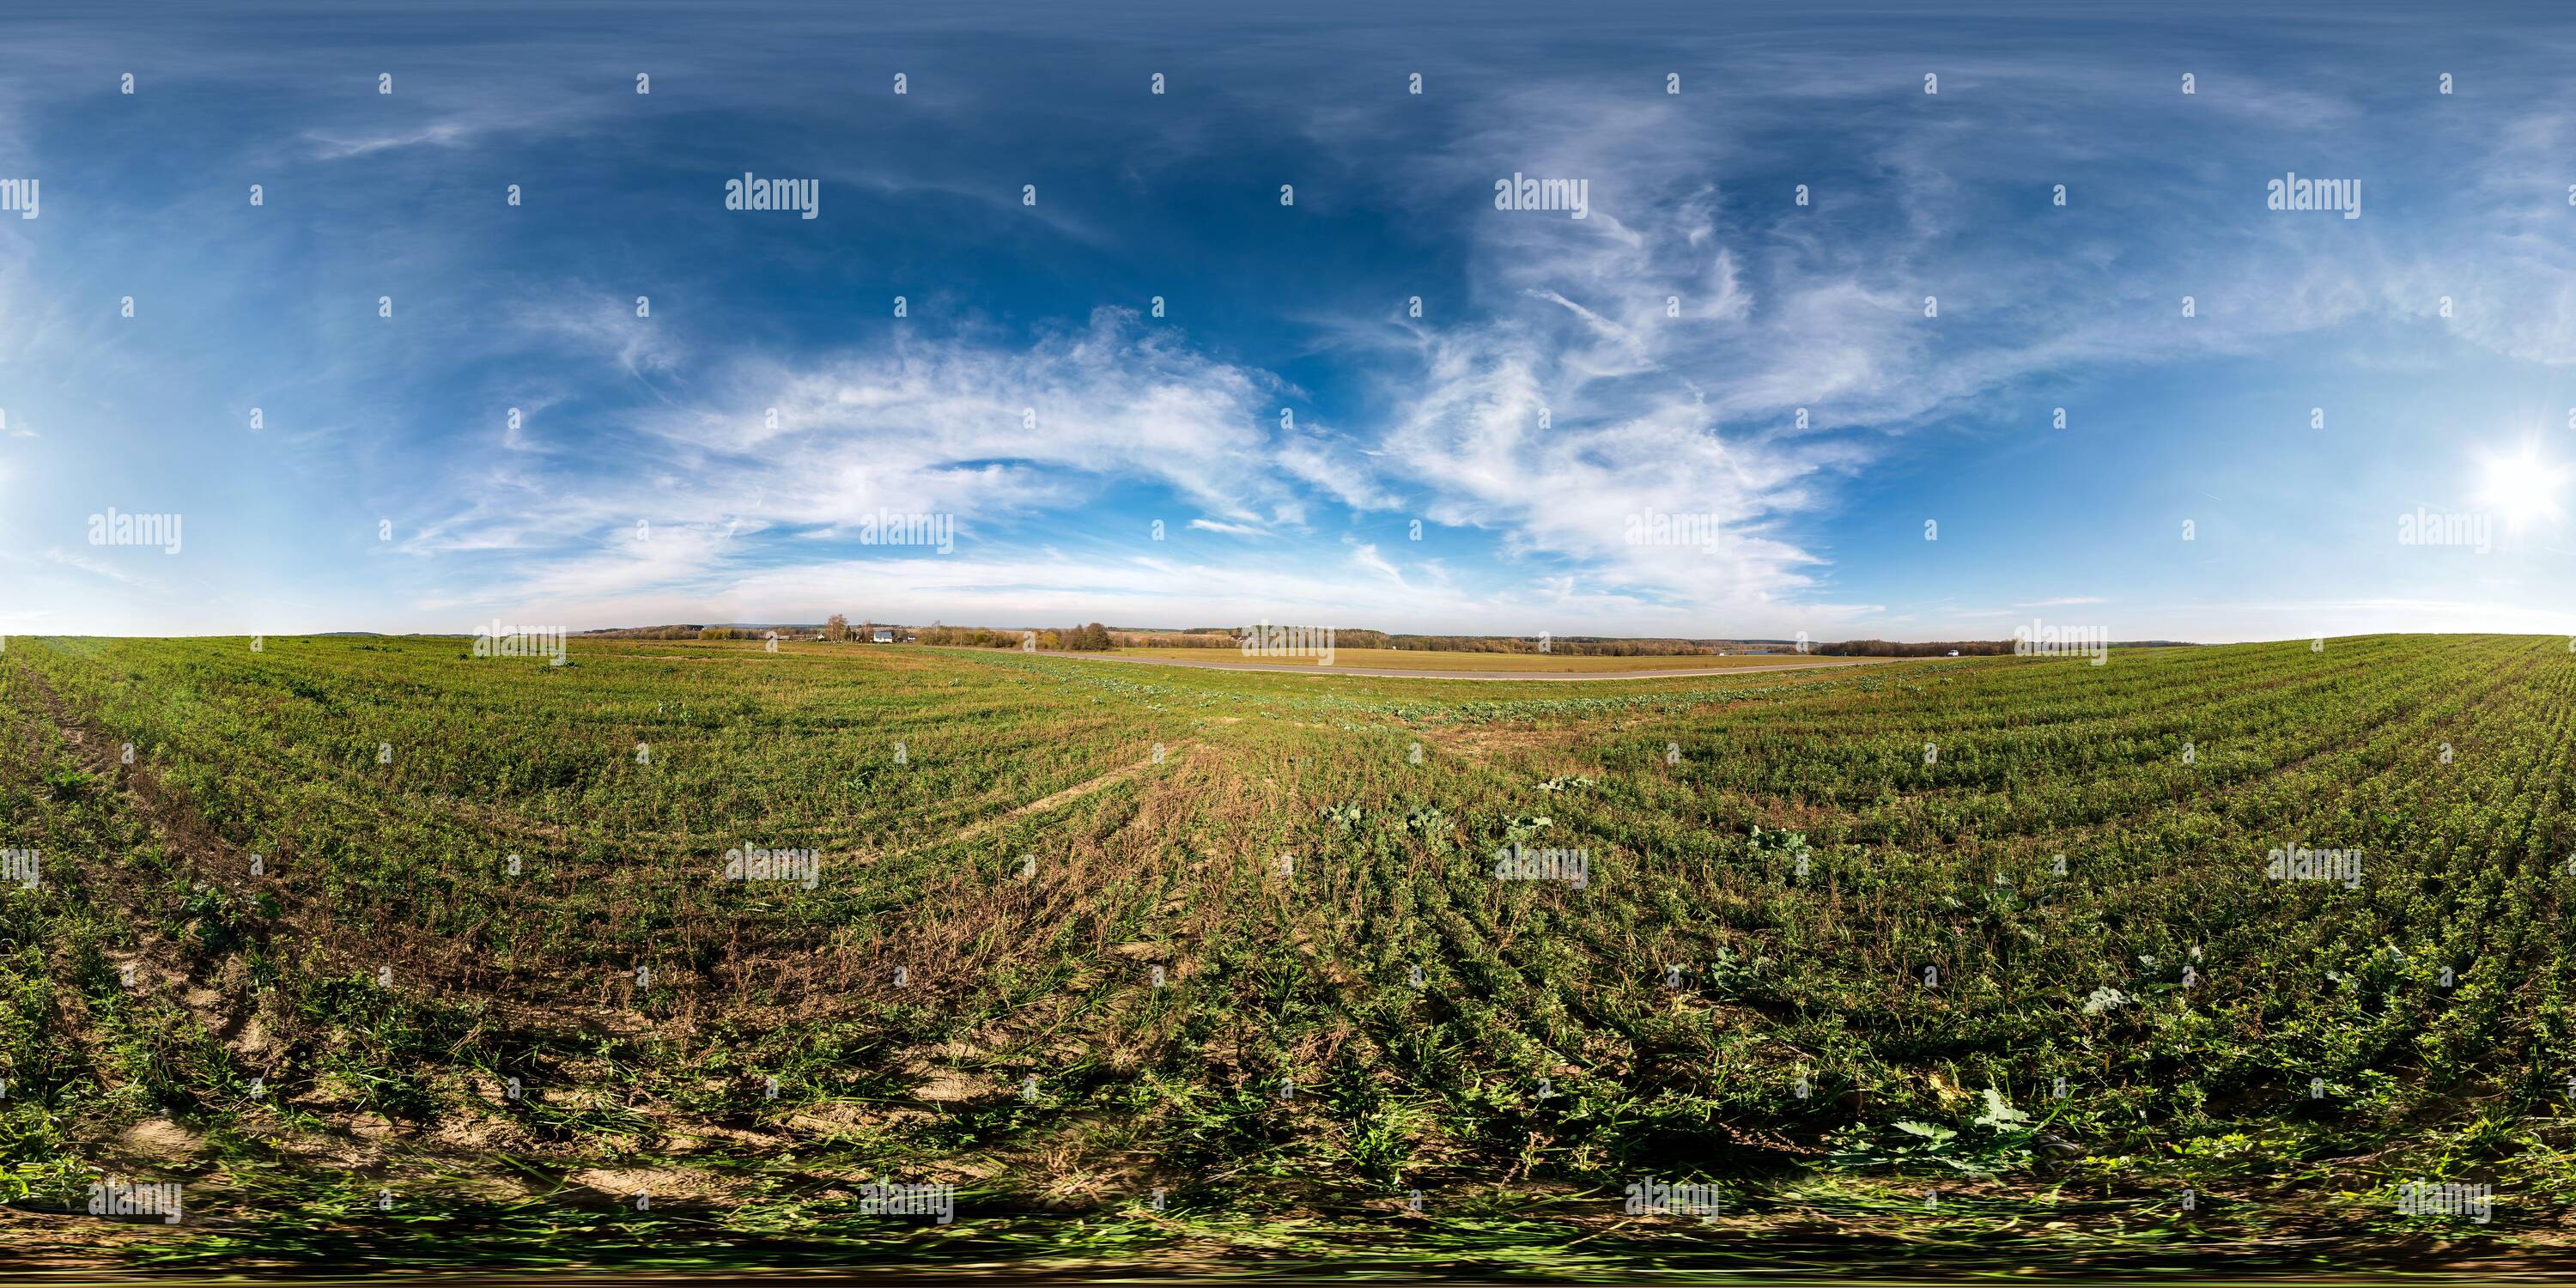 360 View Of Blue Sky Before Sunset With Beautiful Awesome Clouds Full Seamless Spherical Hdri Panorama 360 Degrees Angle View Among Fields In Evening In Equirect Alamy